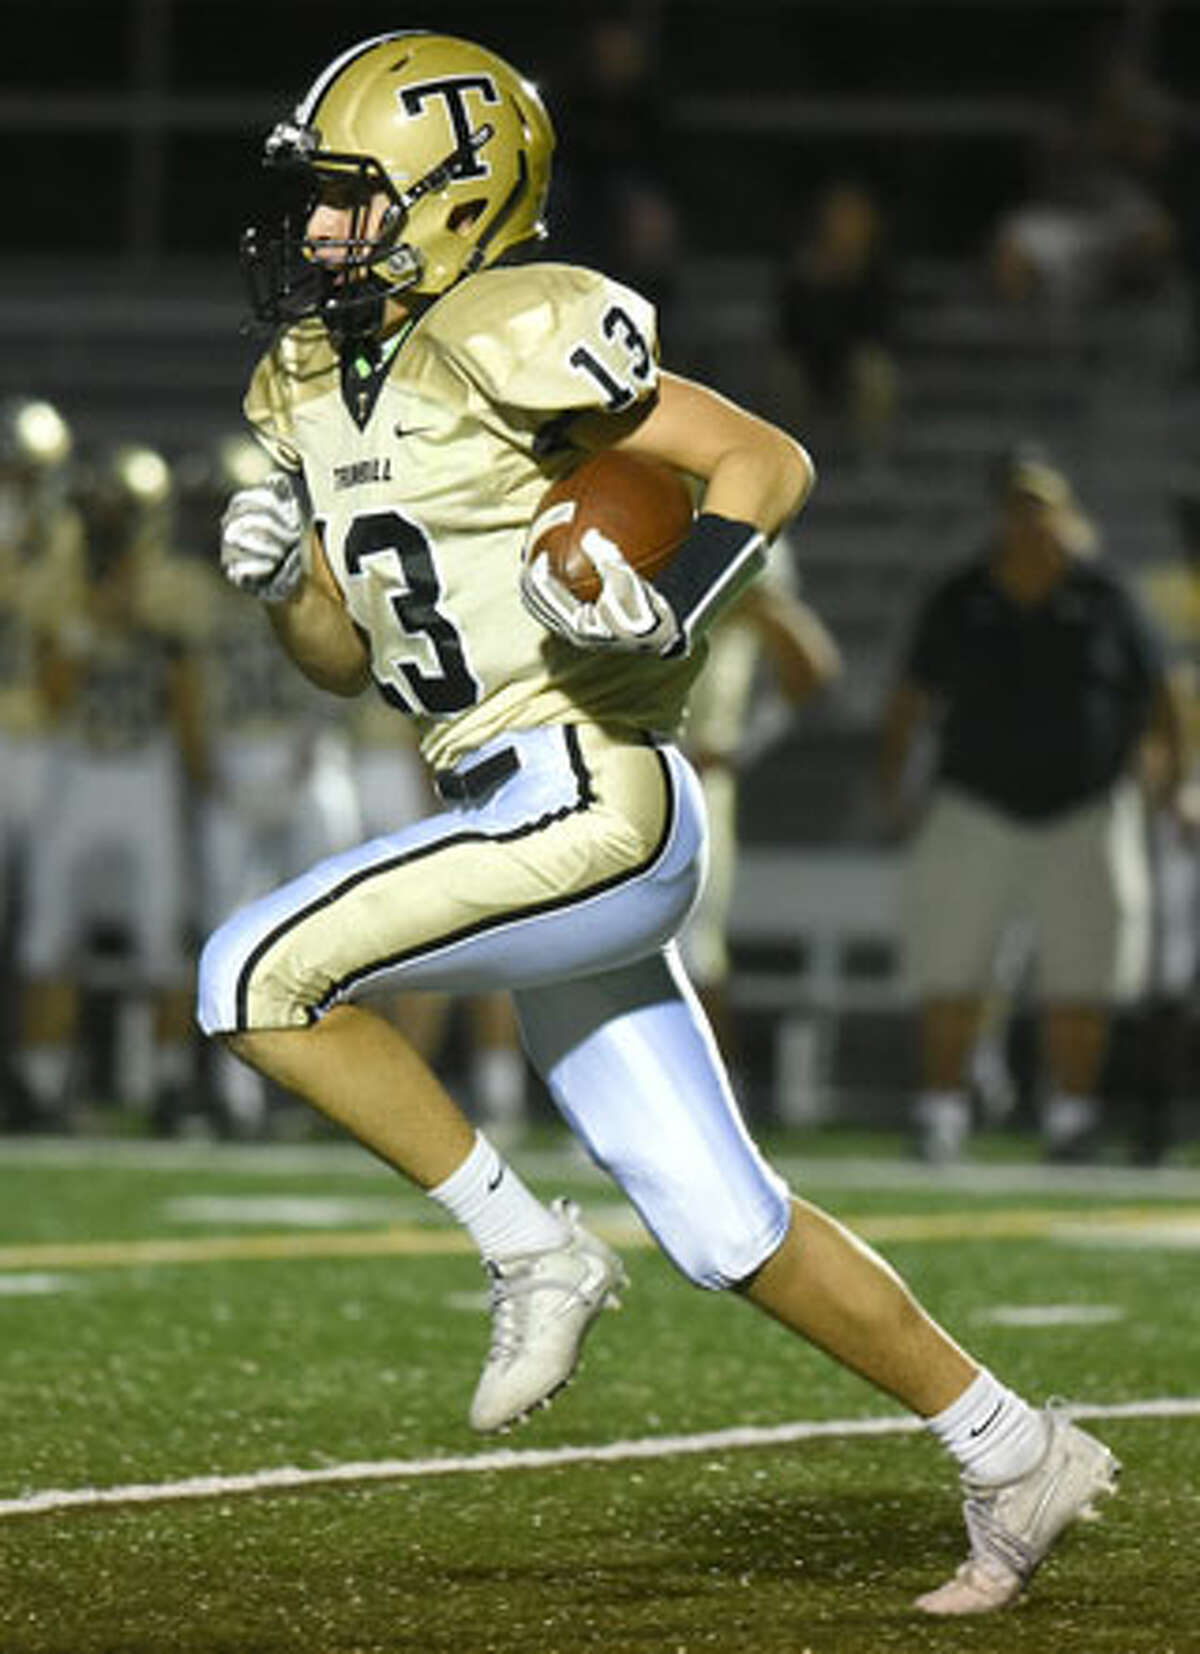 Trumbull's Nolan Shay runs for some yards during Friday's game in New Canaan. — Dave Stewart photo